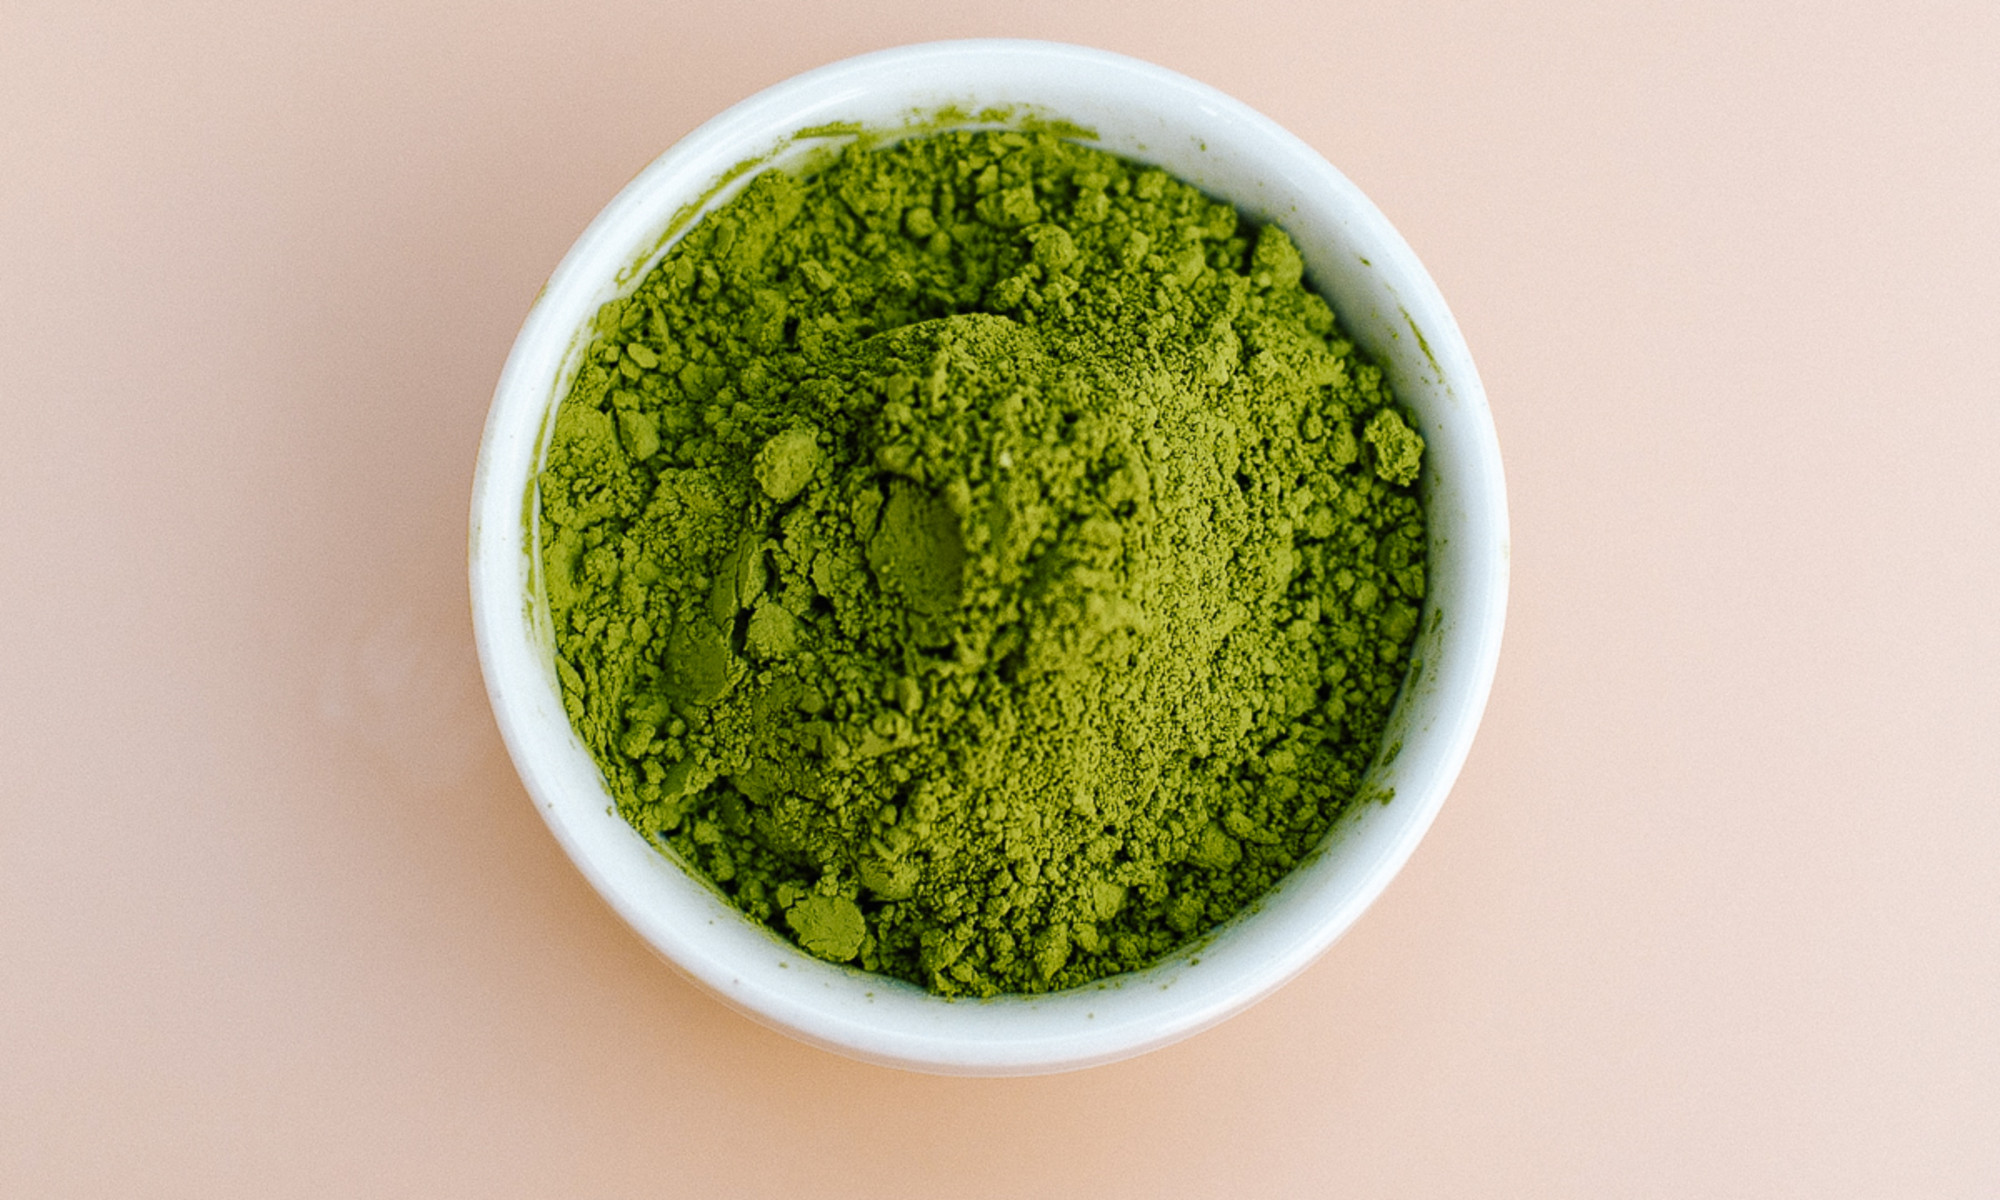 15 Best Superfood Powders Of 2022, According To Nutrition Experts | mindbodygreen